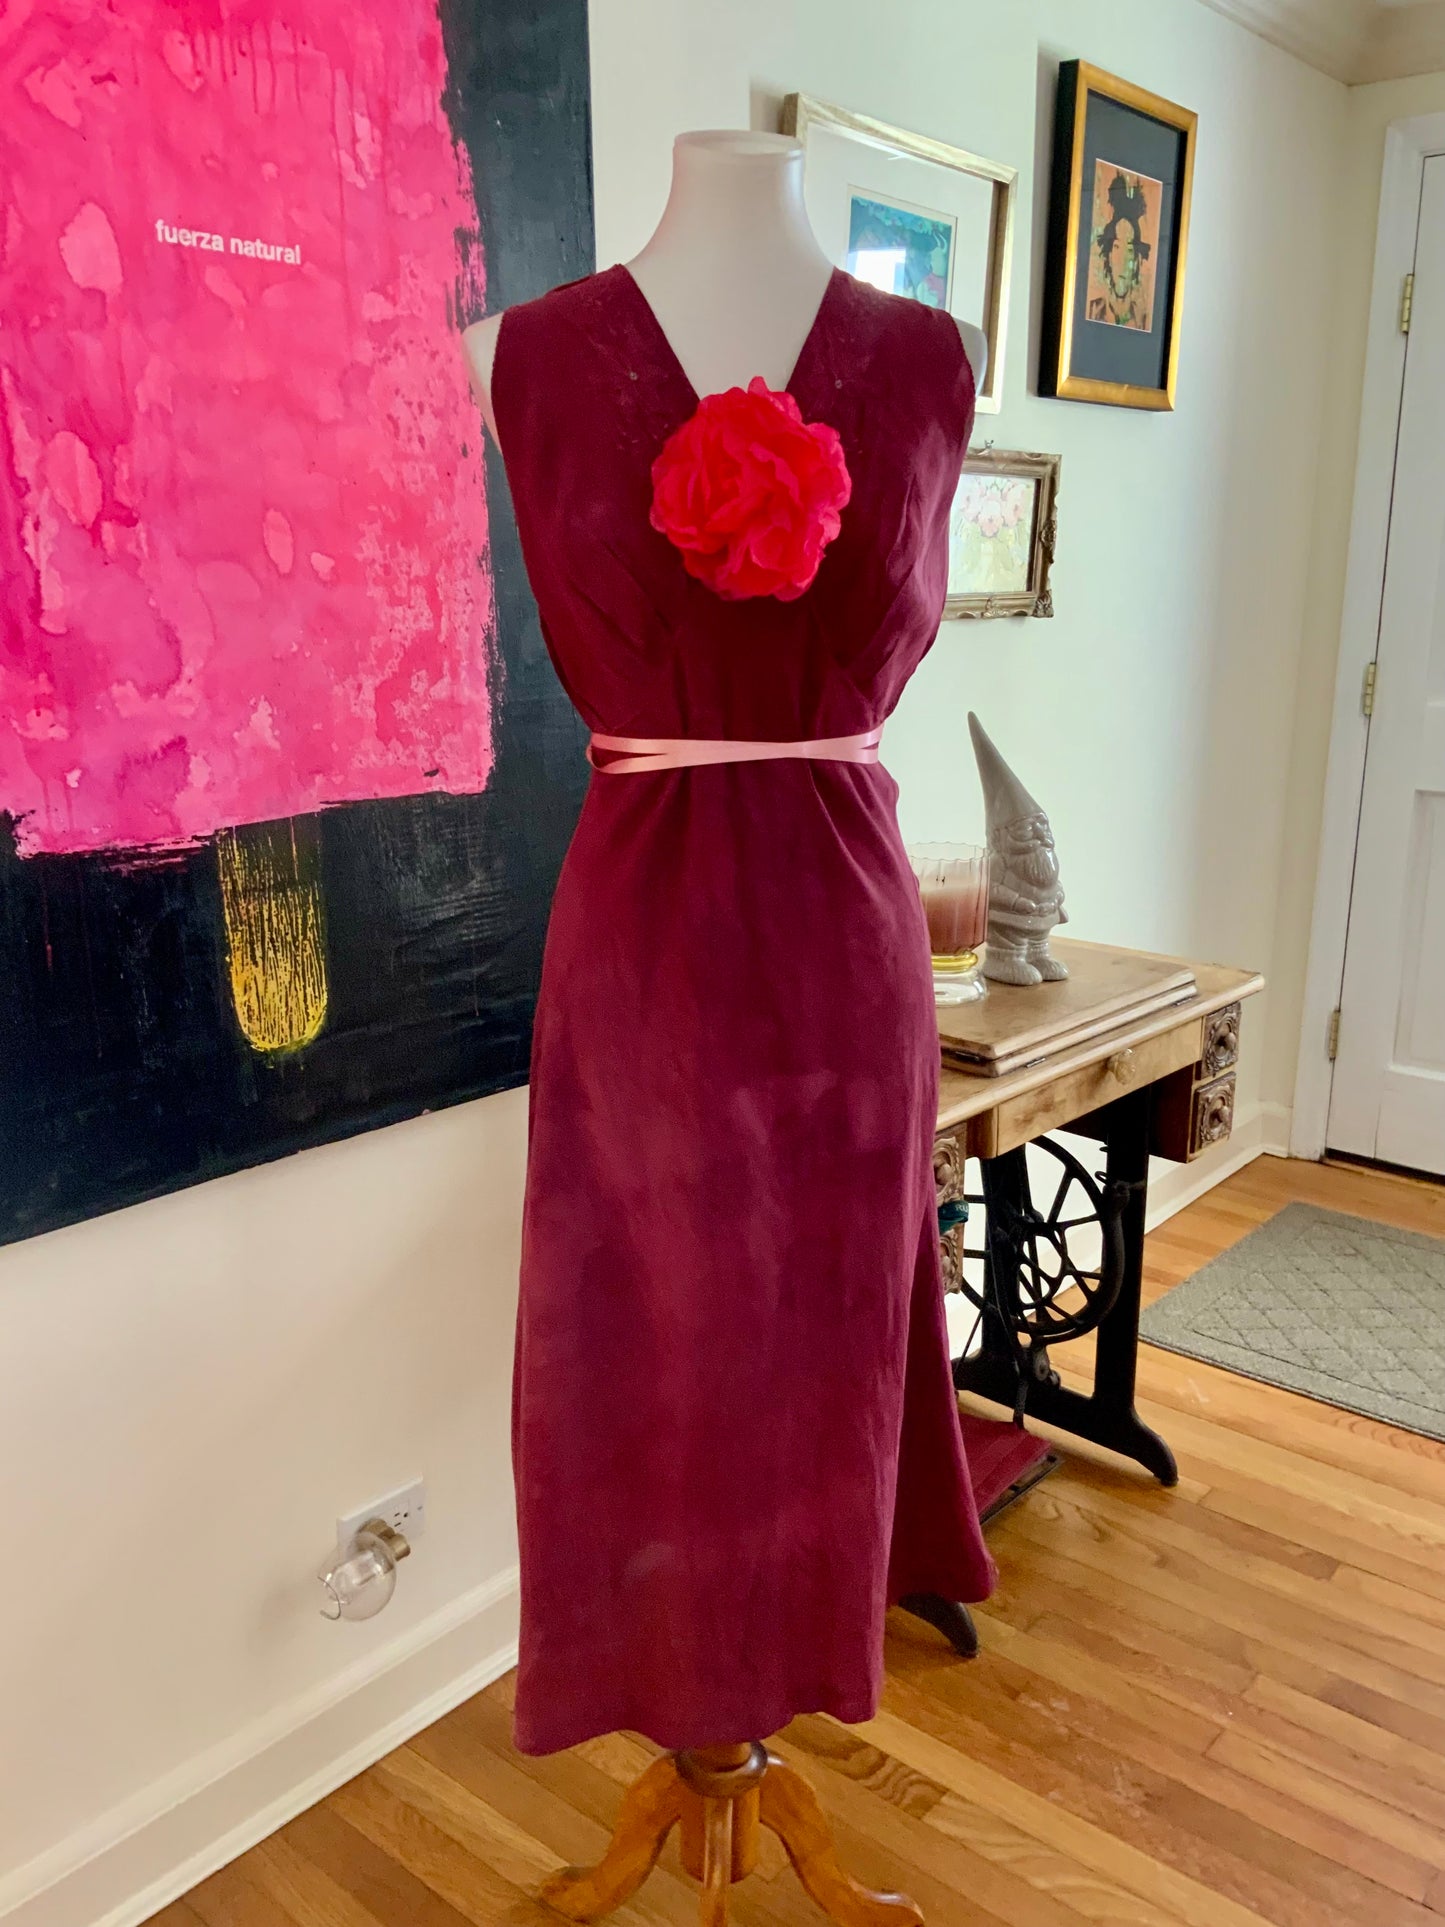 Hand Dyed Nightgown / Slip Dress - 50s